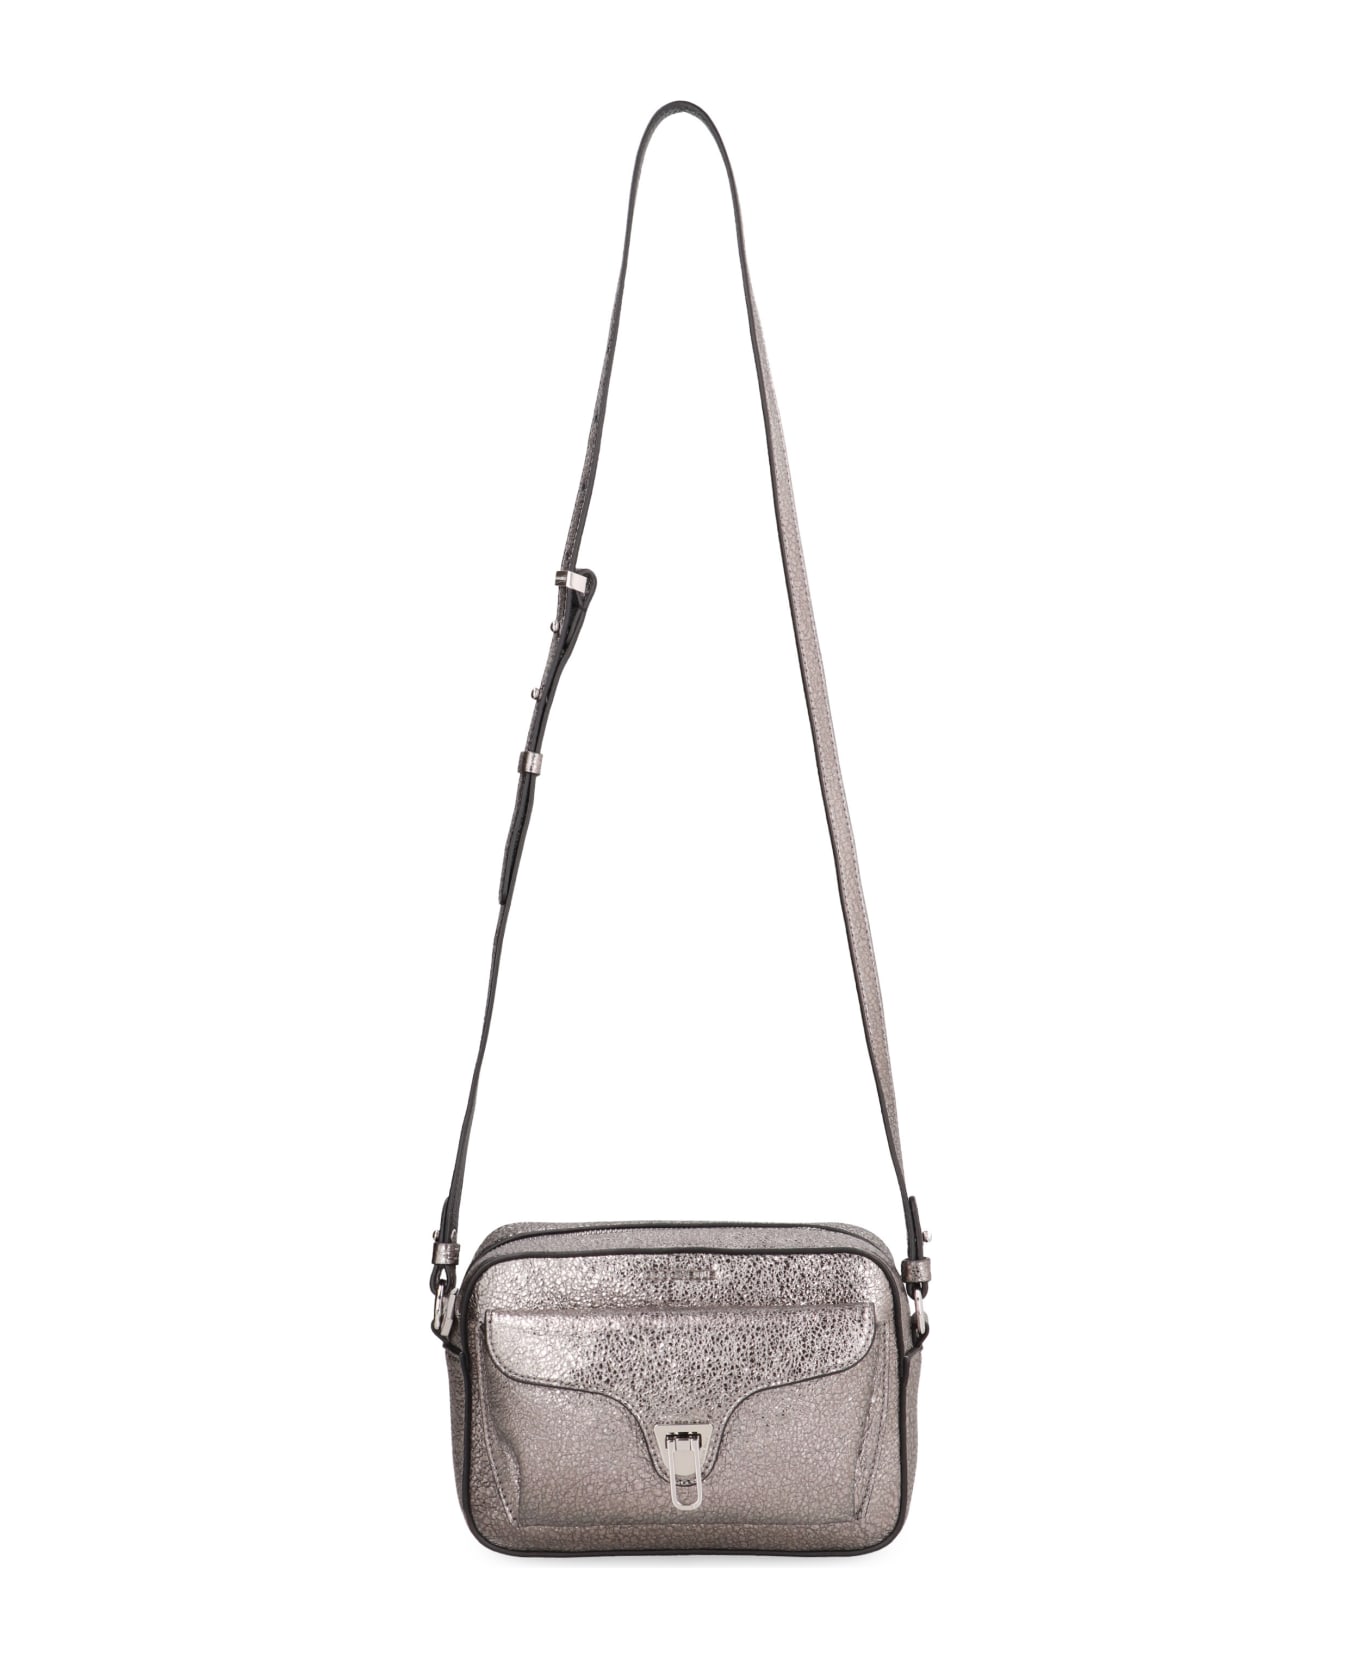 Coccinelle Beat Leather Crossbody Bag - silver ショルダーバッグ